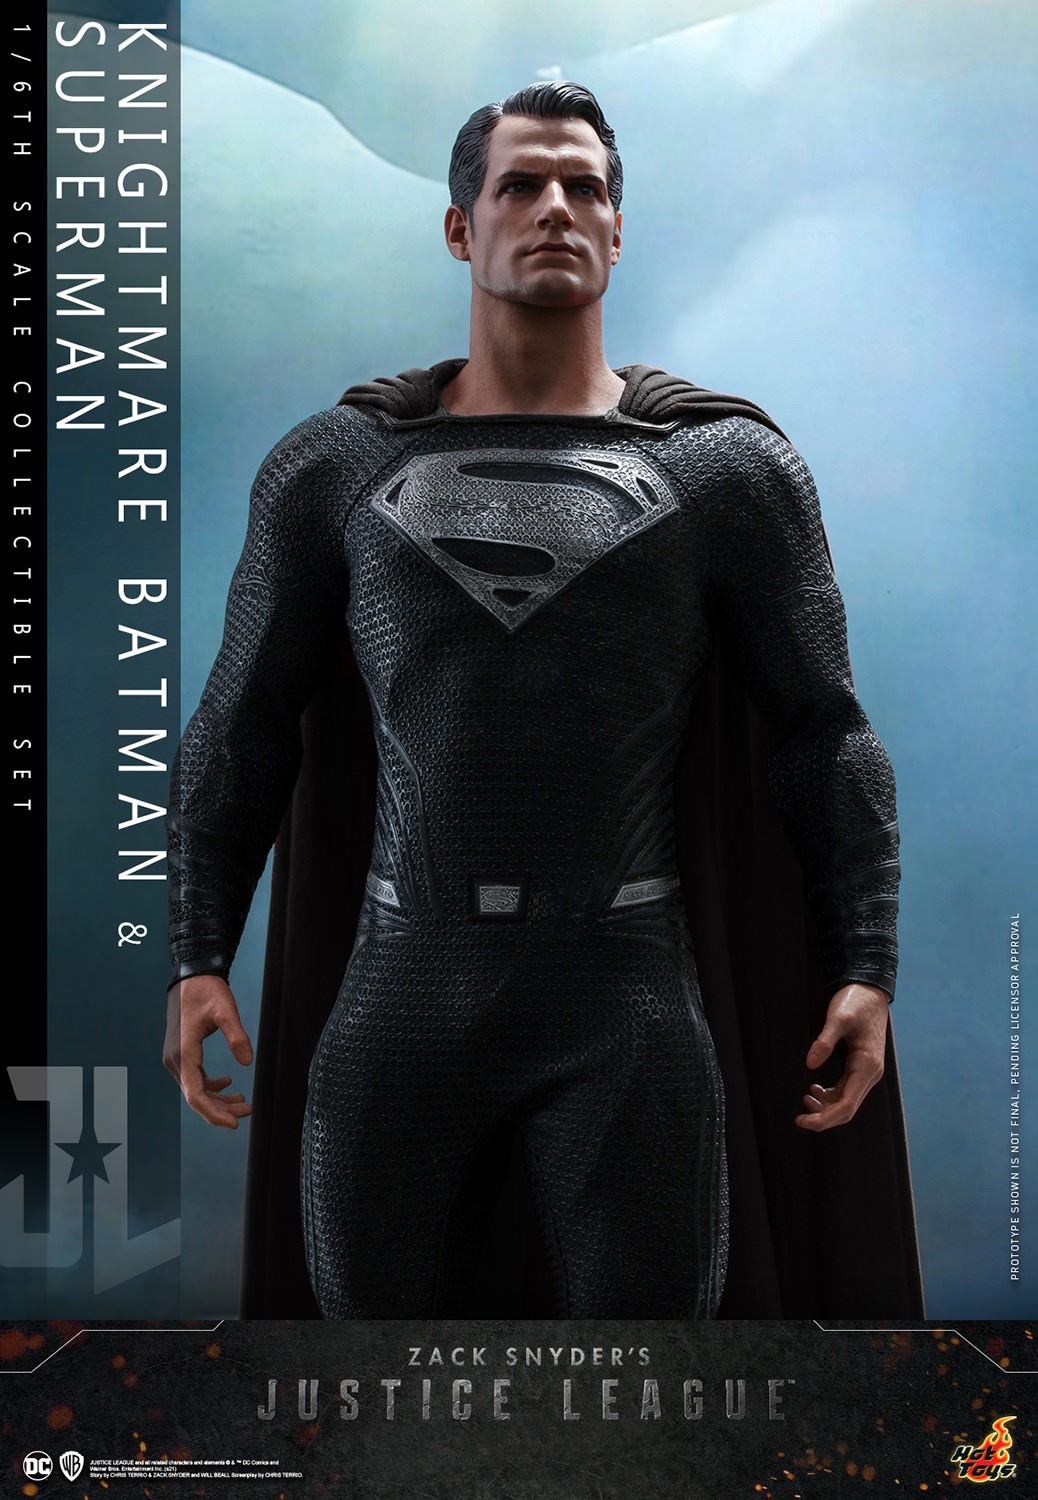 Knightmare Batman and Superman (Prototype Shown) View 30